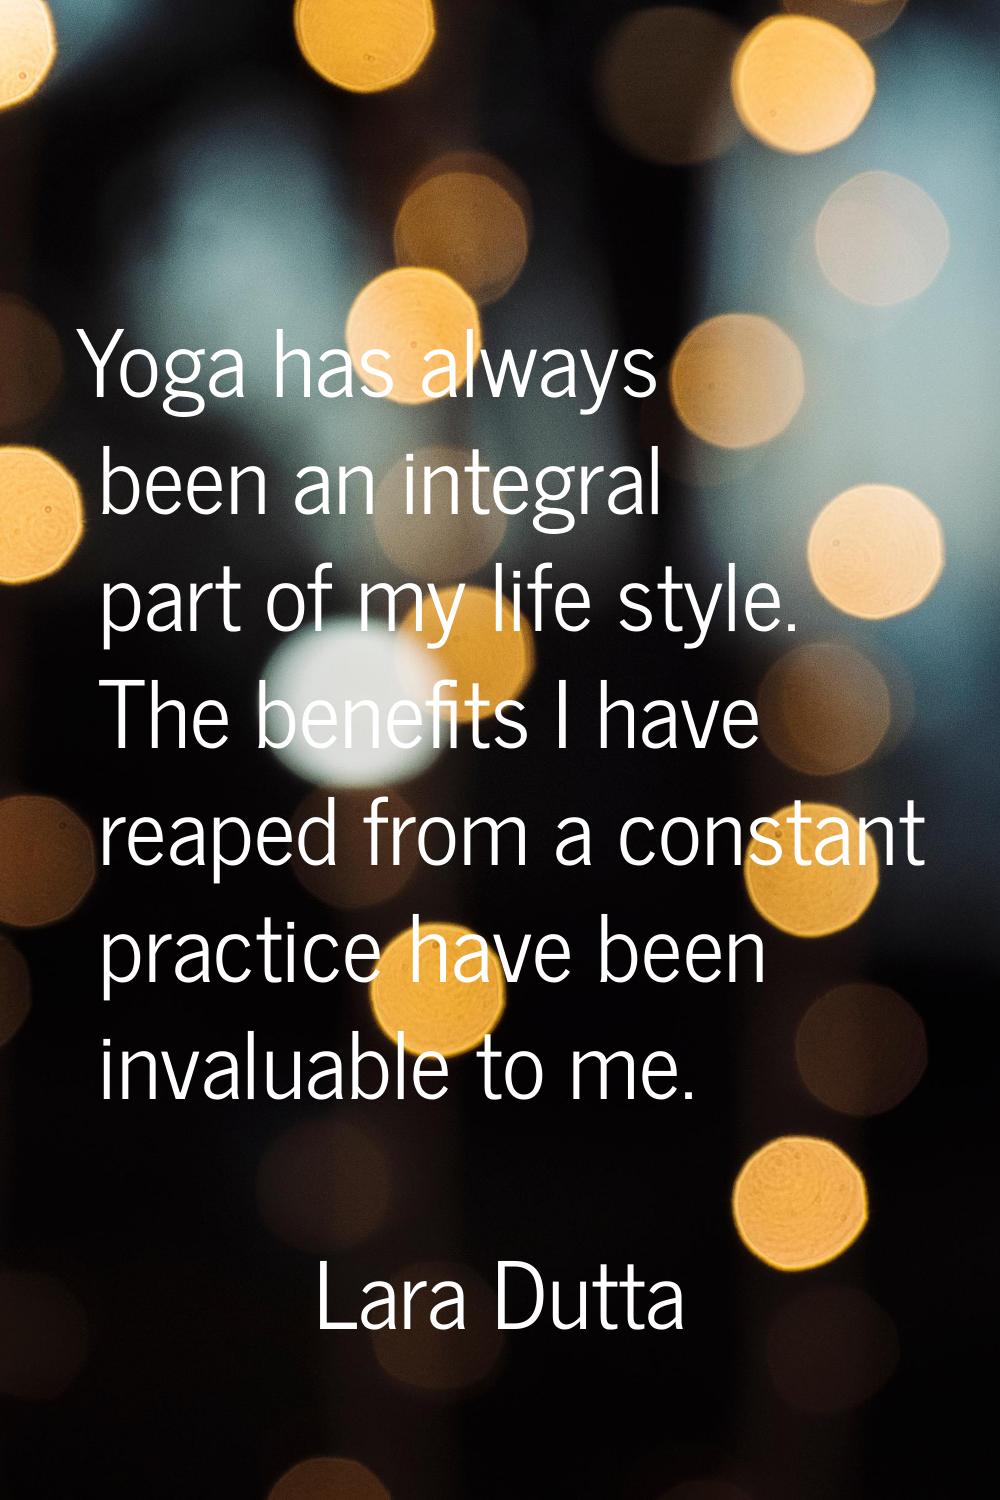 Yoga has always been an integral part of my life style. The benefits I have reaped from a constant 